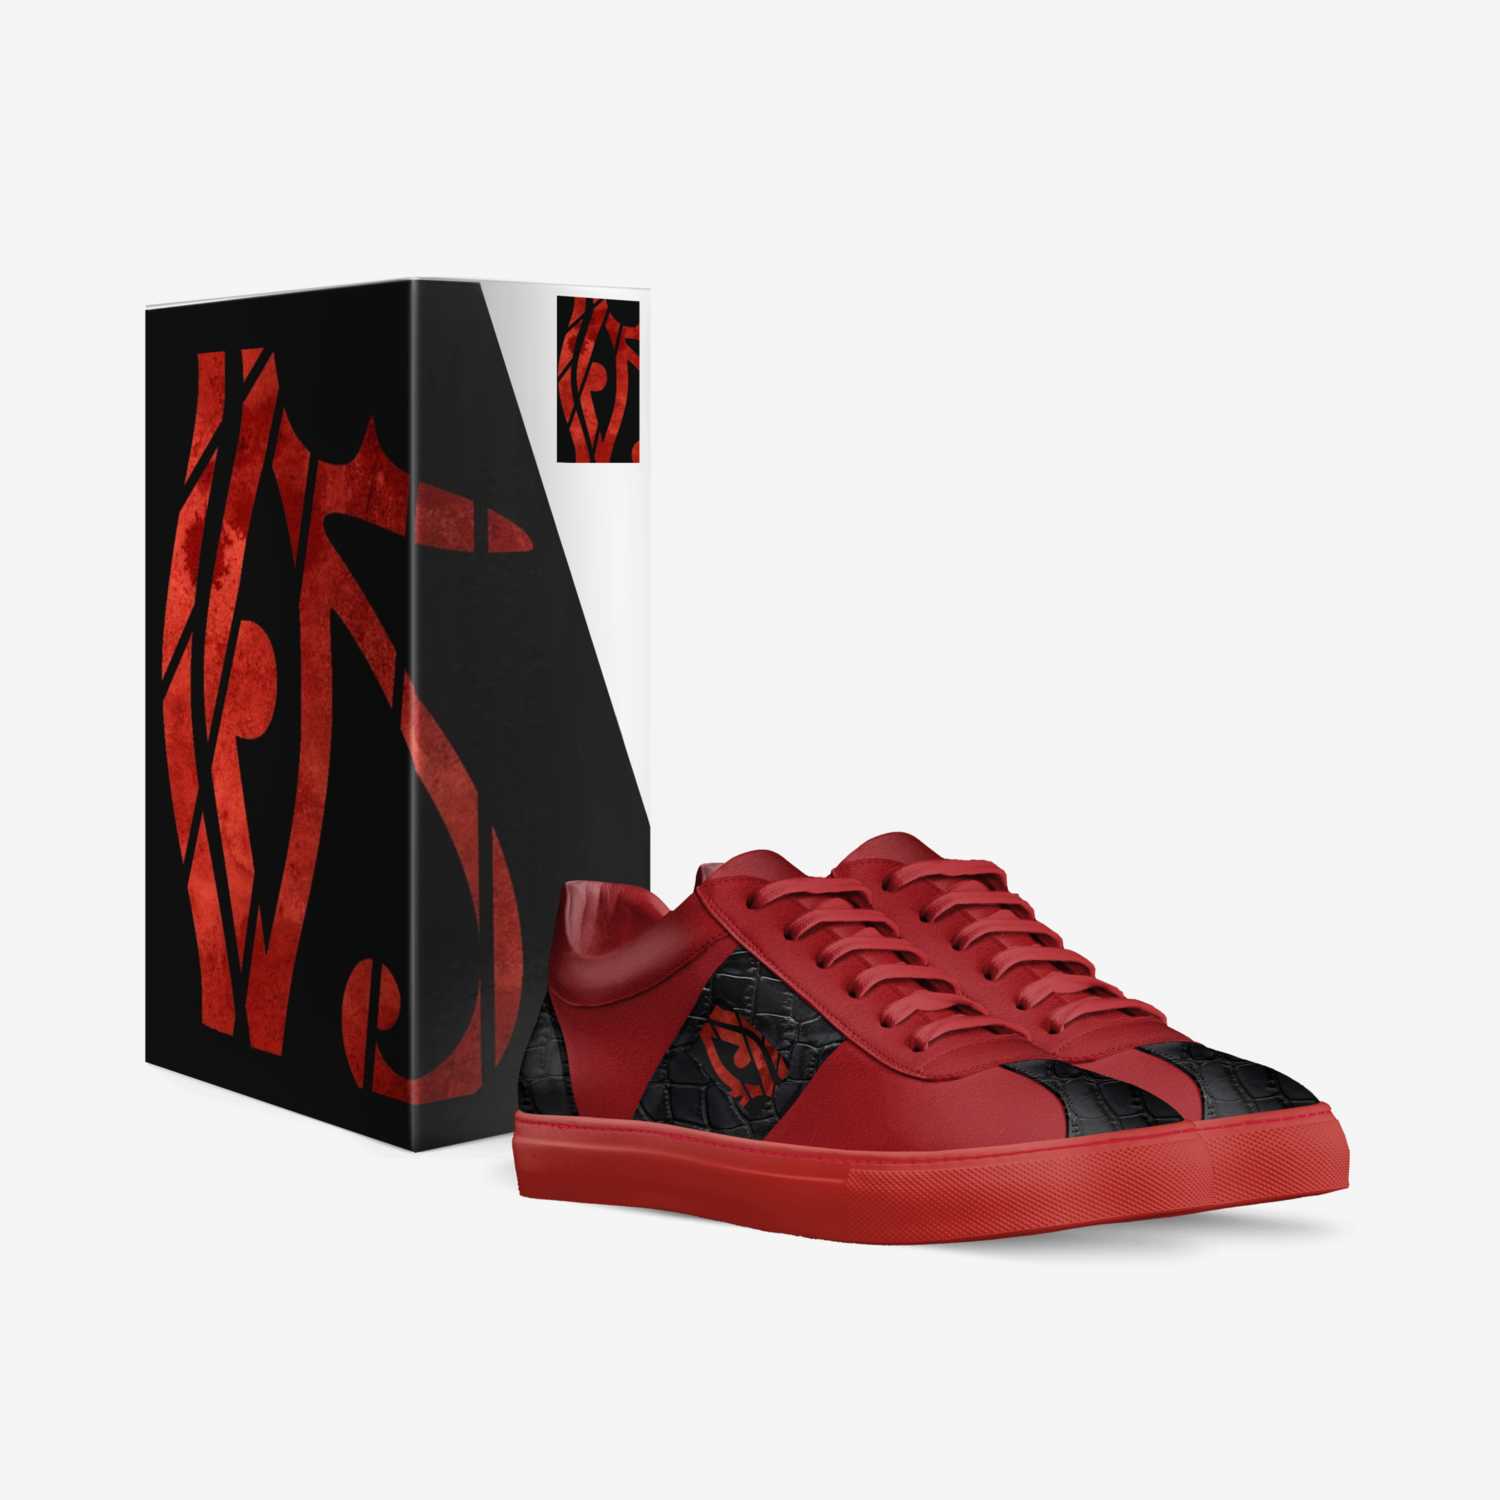 EYE OF RA  custom made in Italy shoes by Javon Coleman | Box view